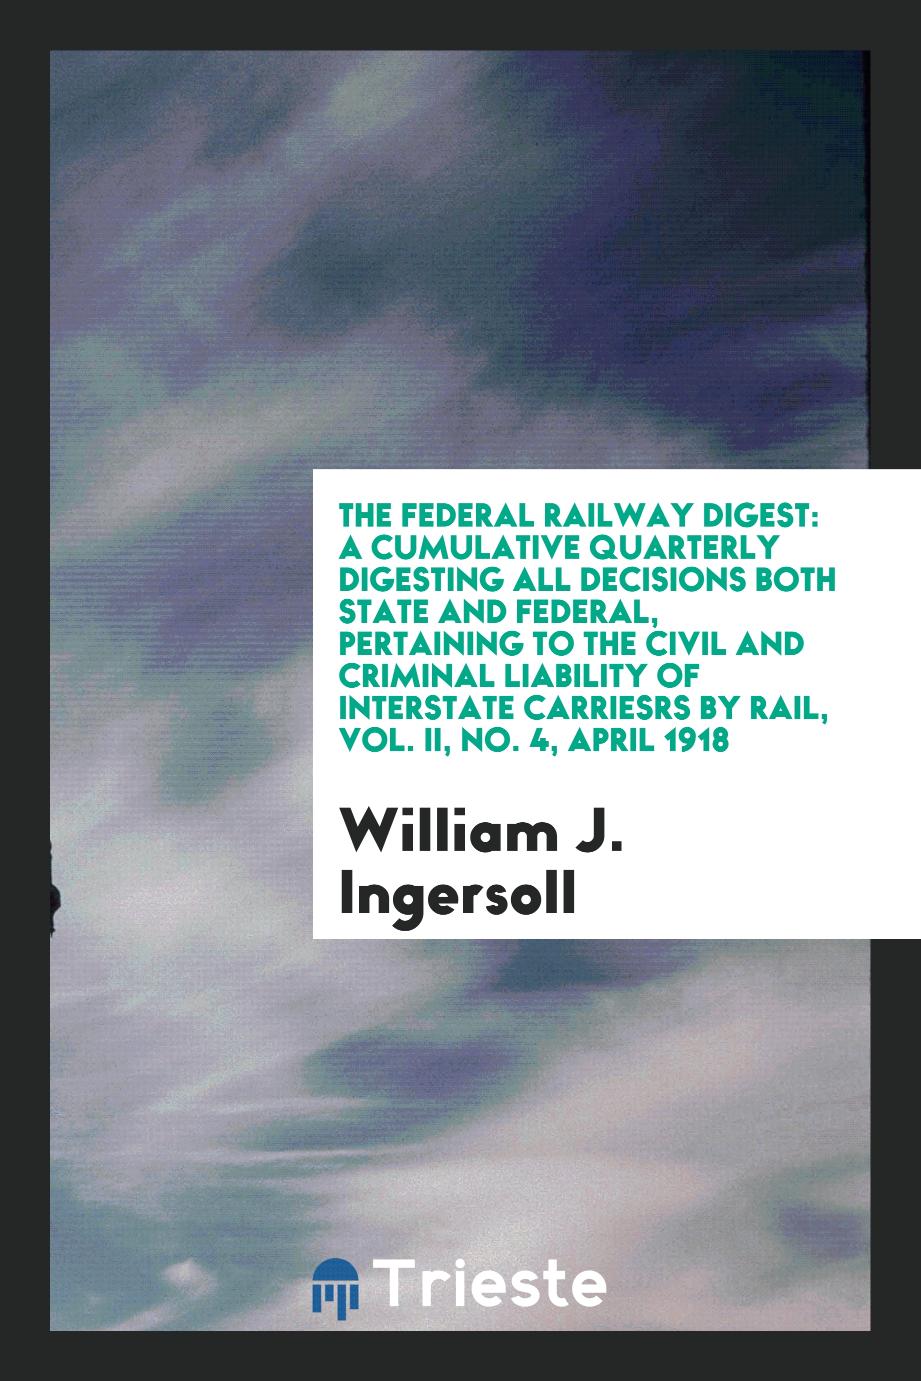 William J. Ingersoll - The Federal Railway Digest: A Cumulative Quarterly Digesting All Decisions Both State and Federal, Pertaining to the Civil and Criminal Liability of Interstate Carriesrs by Rail, Vol. II, No. 4, April 1918